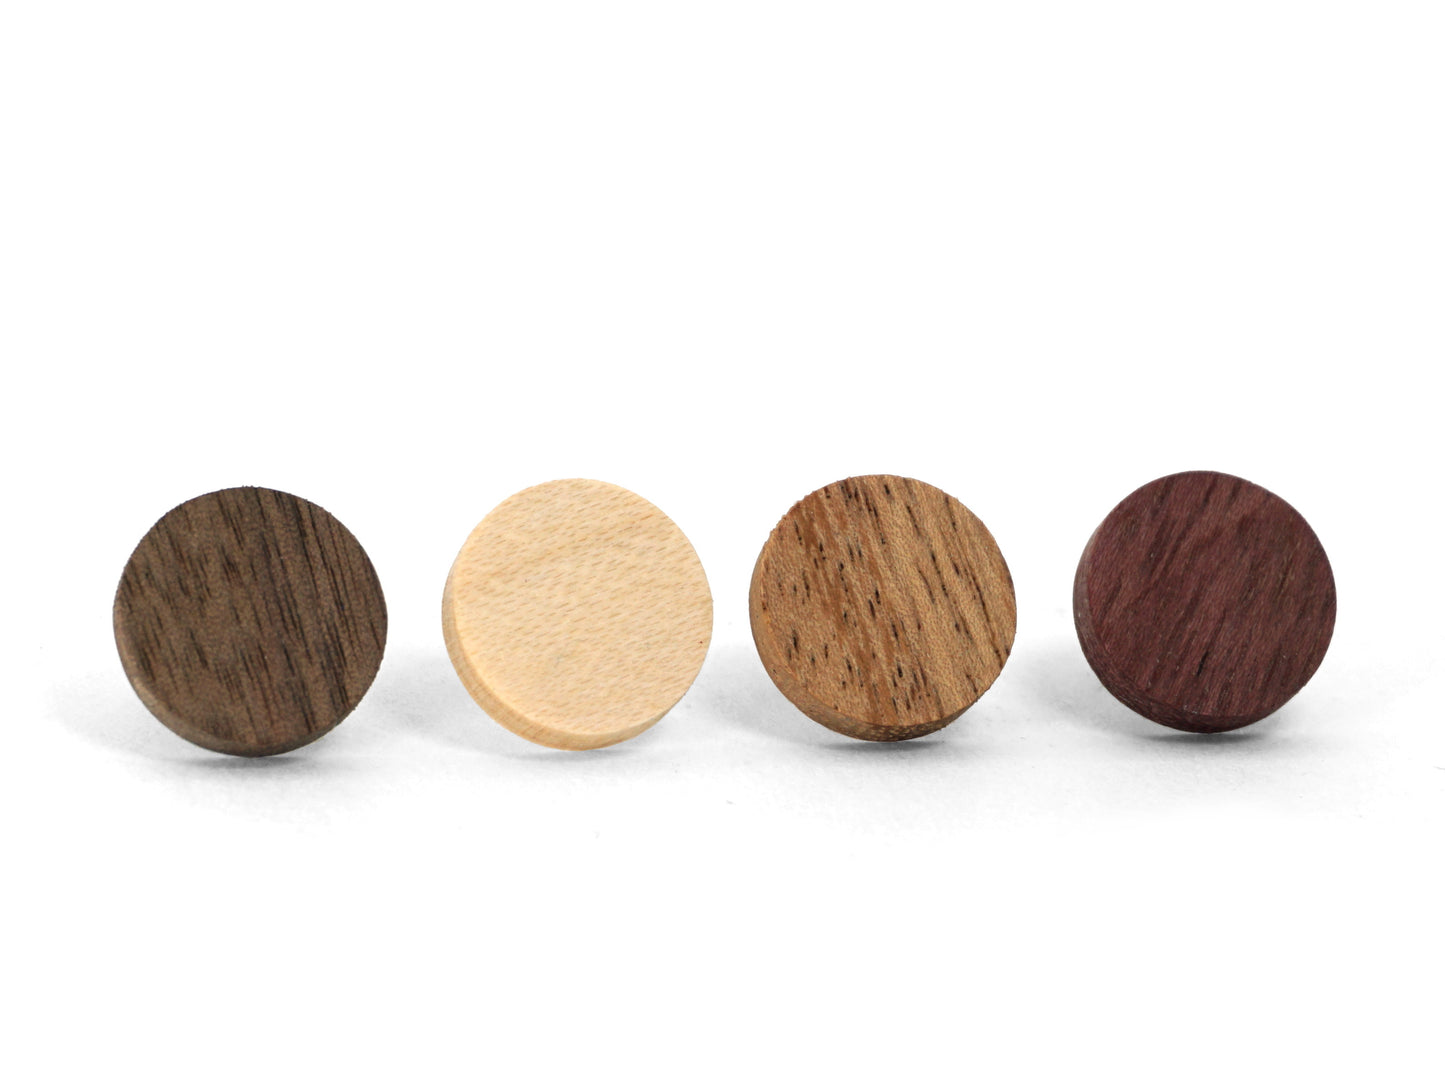 Different colored natural wood round stud earrings